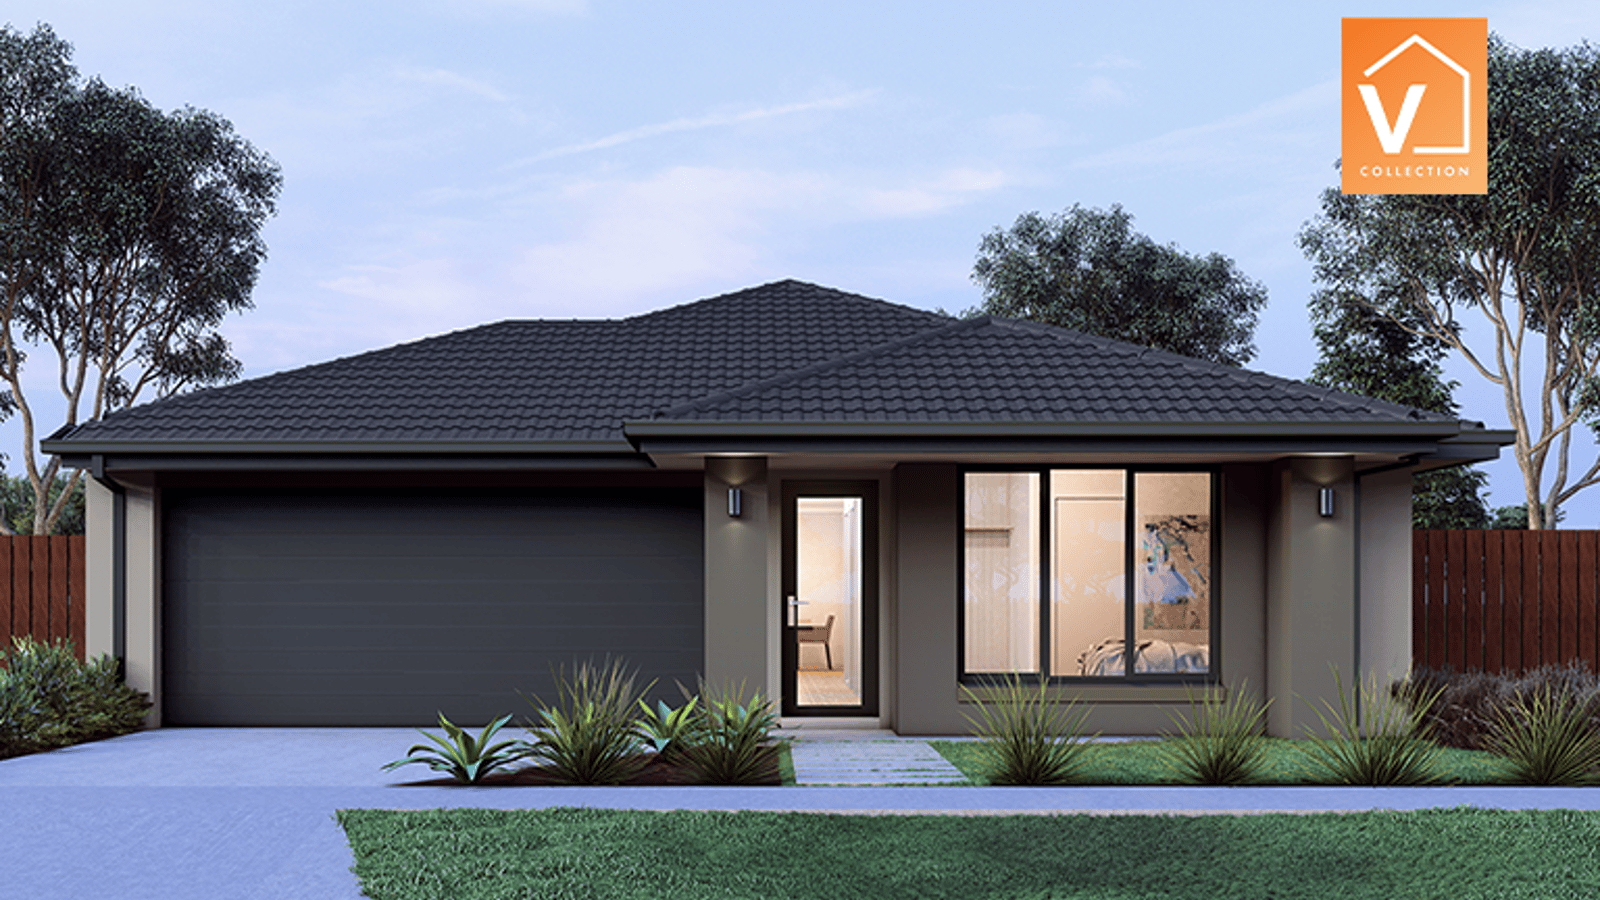 Photo of Lot 515 Kenmore Way - The Orchards, Clyde VIC 3978 AUS